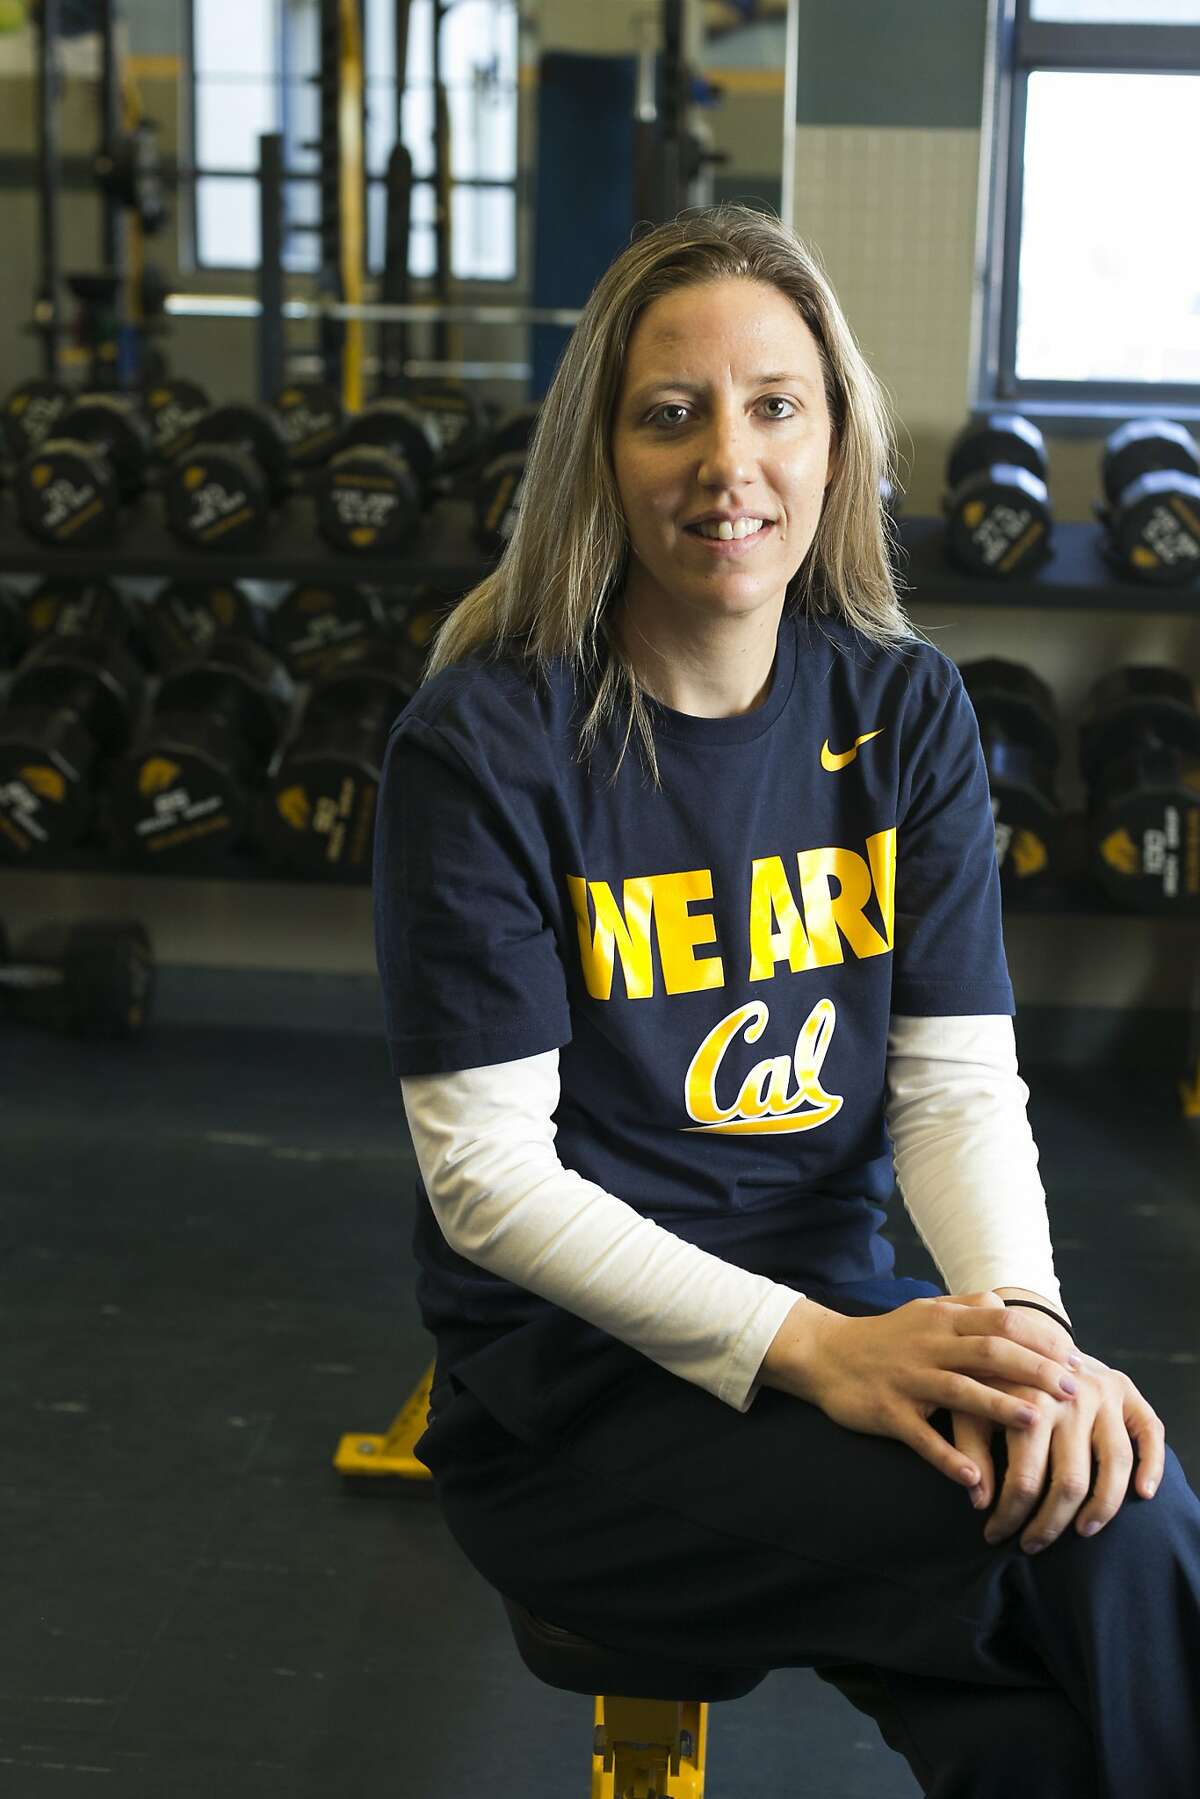 Cal Basketball Coach Says Southwest Asked For Proof Biracial Son Was Hers